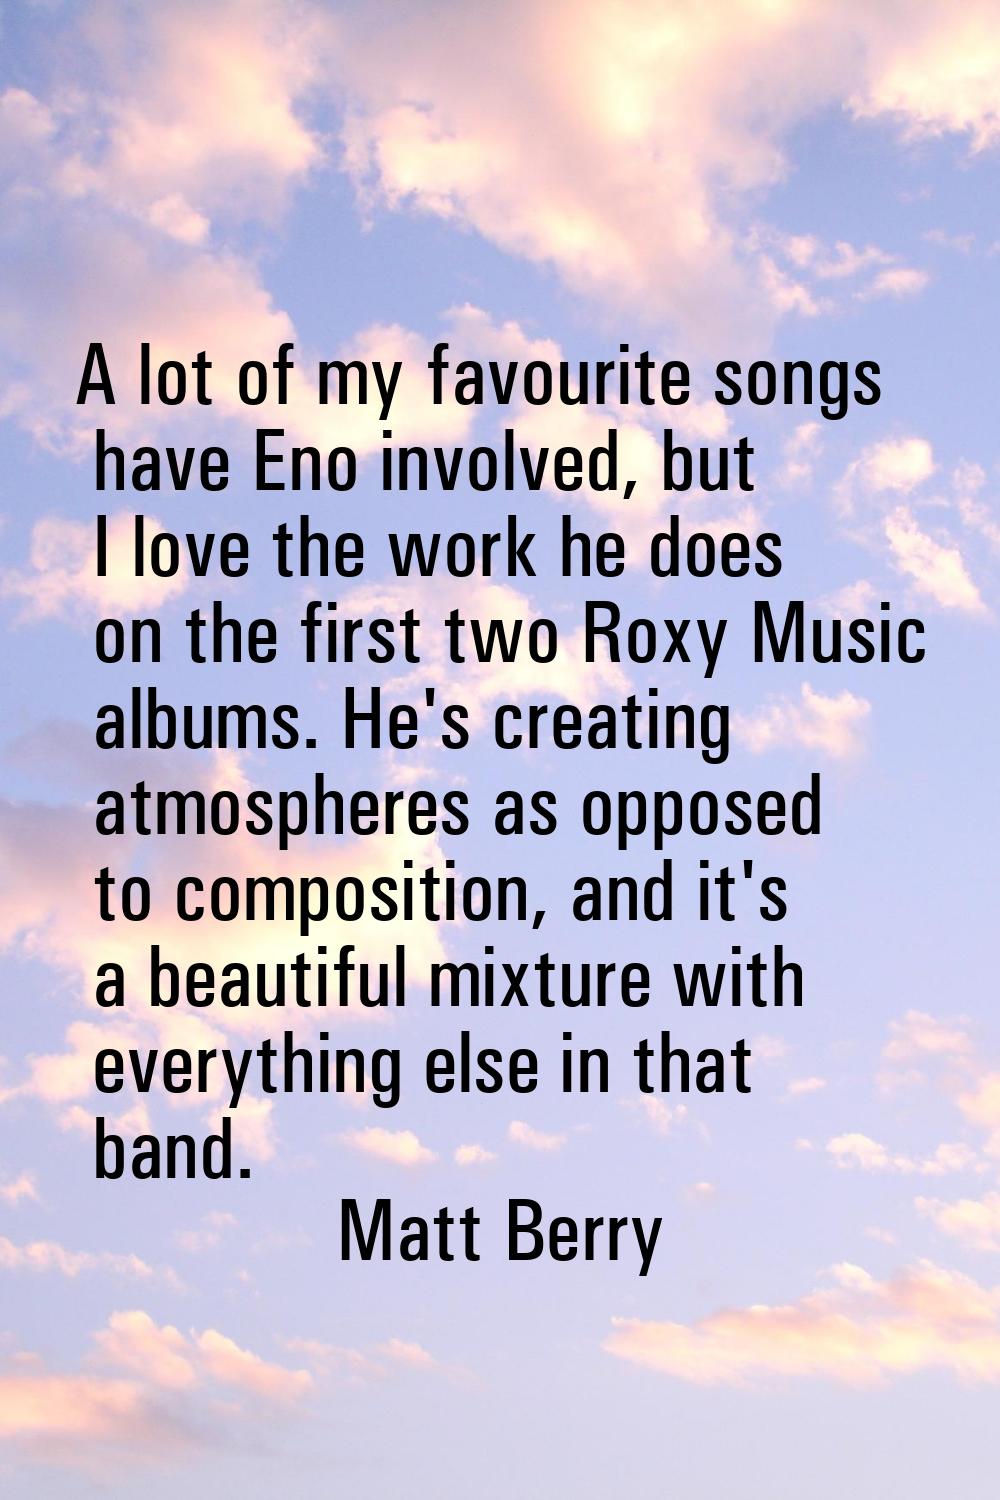 A lot of my favourite songs have Eno involved, but I love the work he does on the first two Roxy Mu